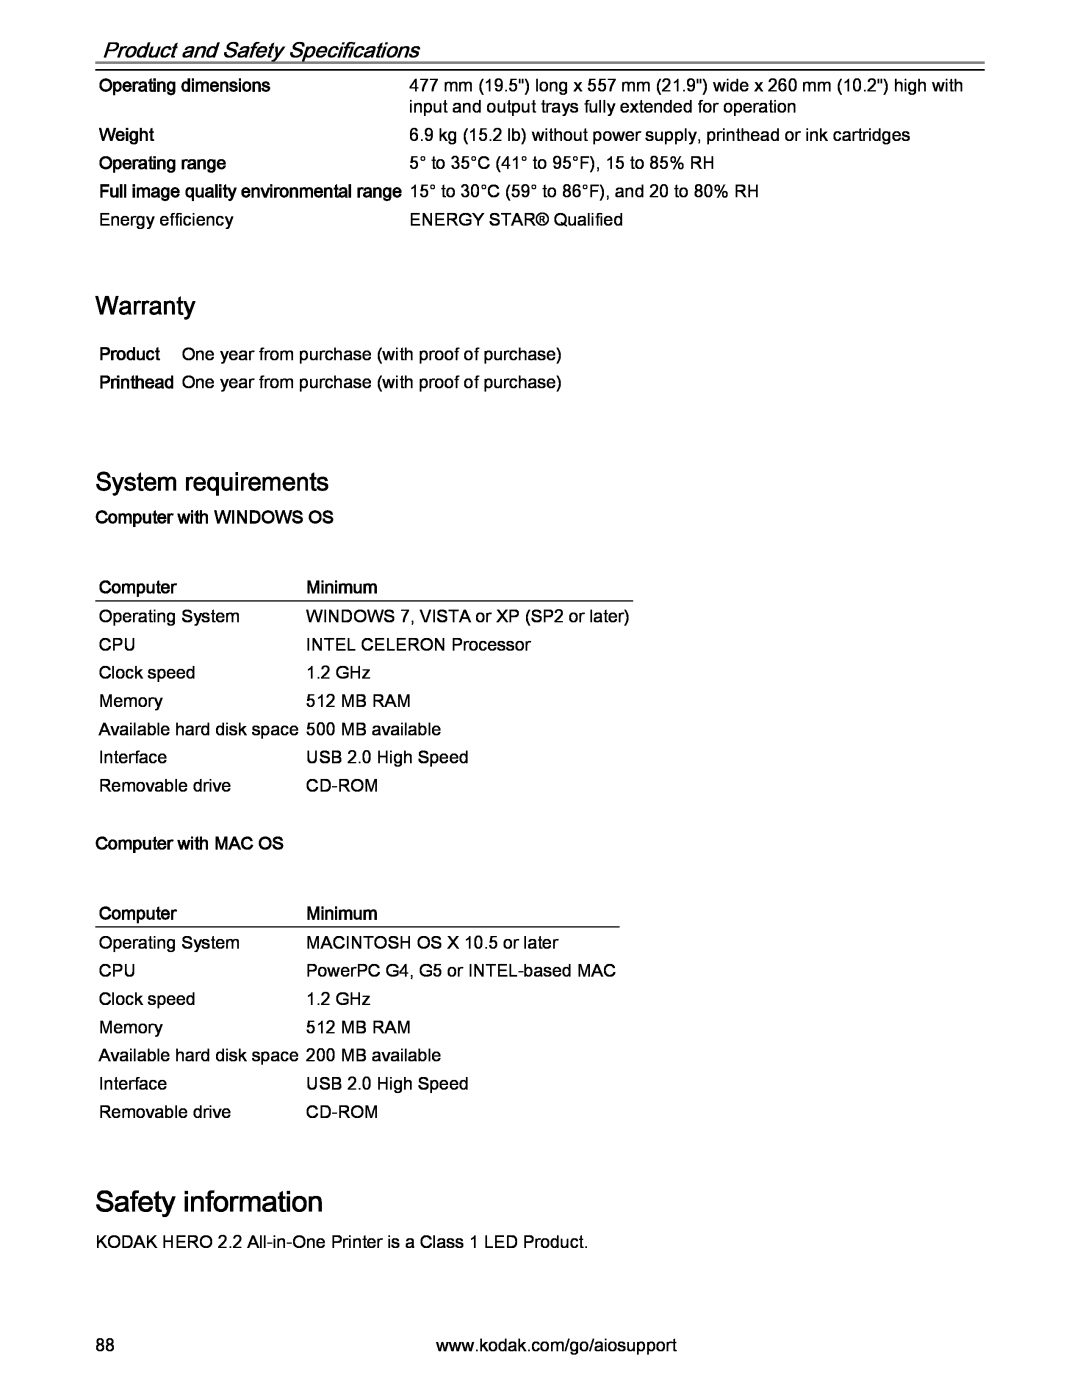 Kodak 2.2 manual Safety information, Warranty, System requirements, Operating dimensions, Weight, Operating range, Computer 